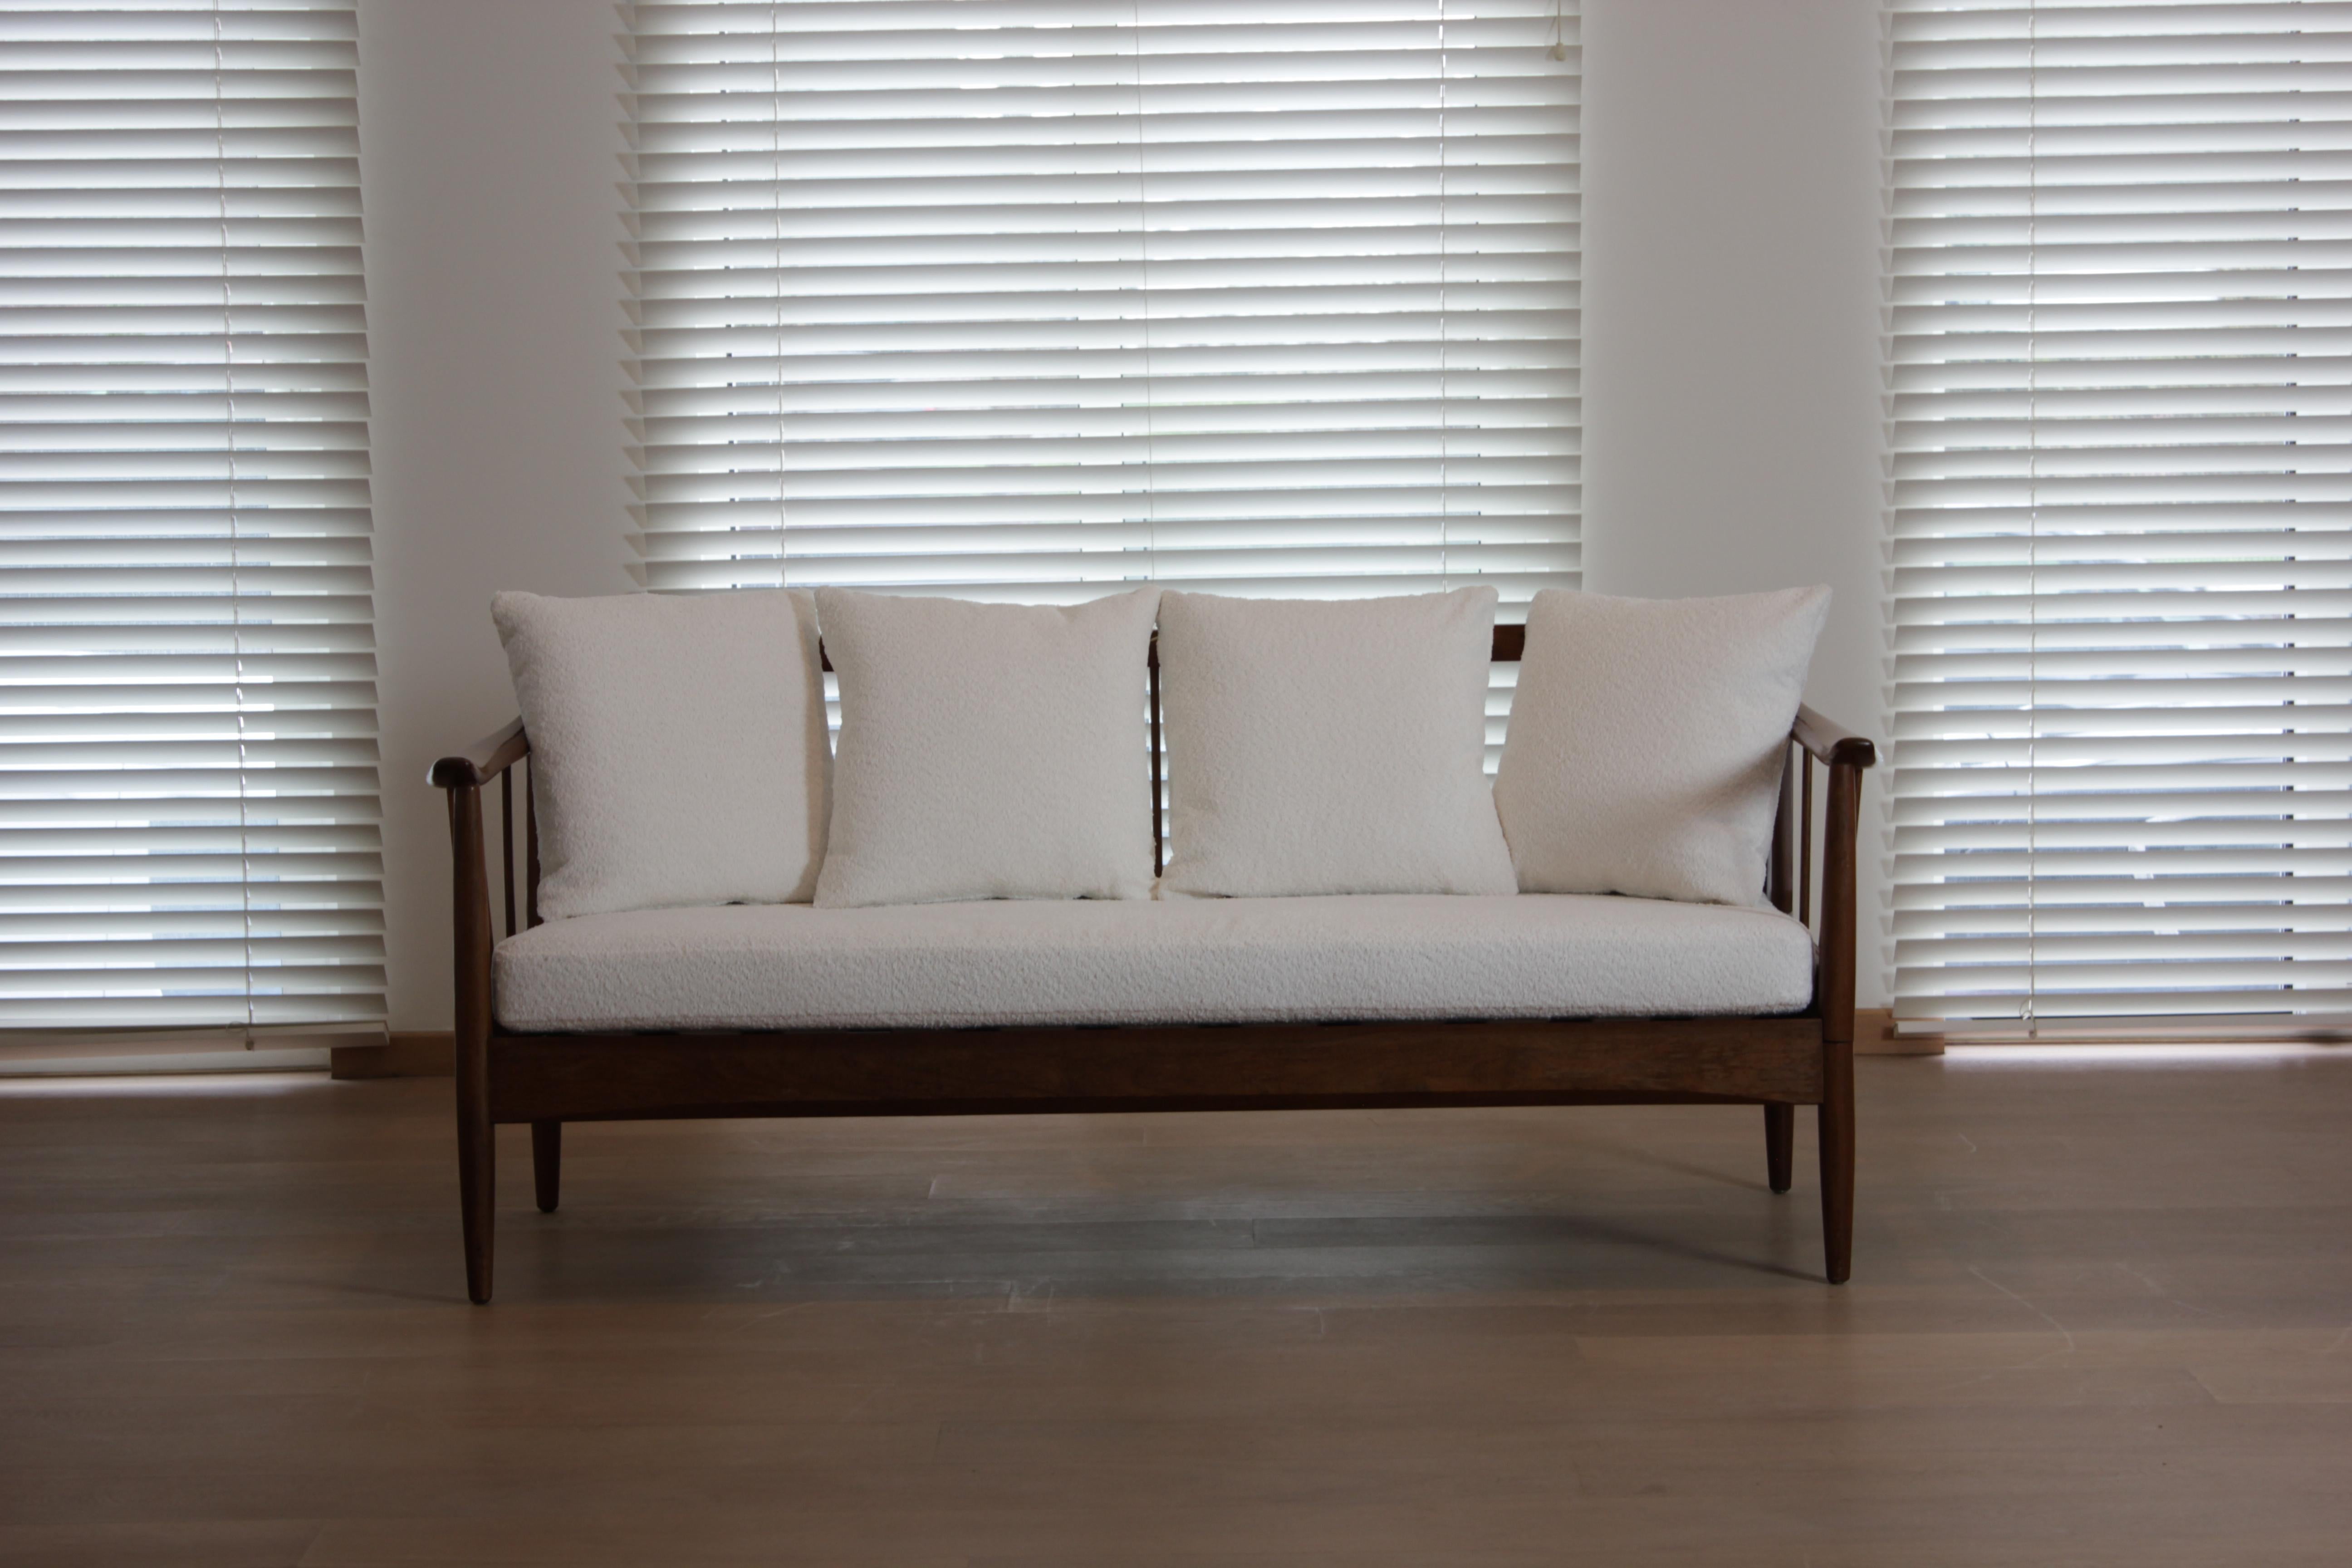 Mid 20th Century Modern Daybed by Greaves & Thomas, 1960s For Sale 3